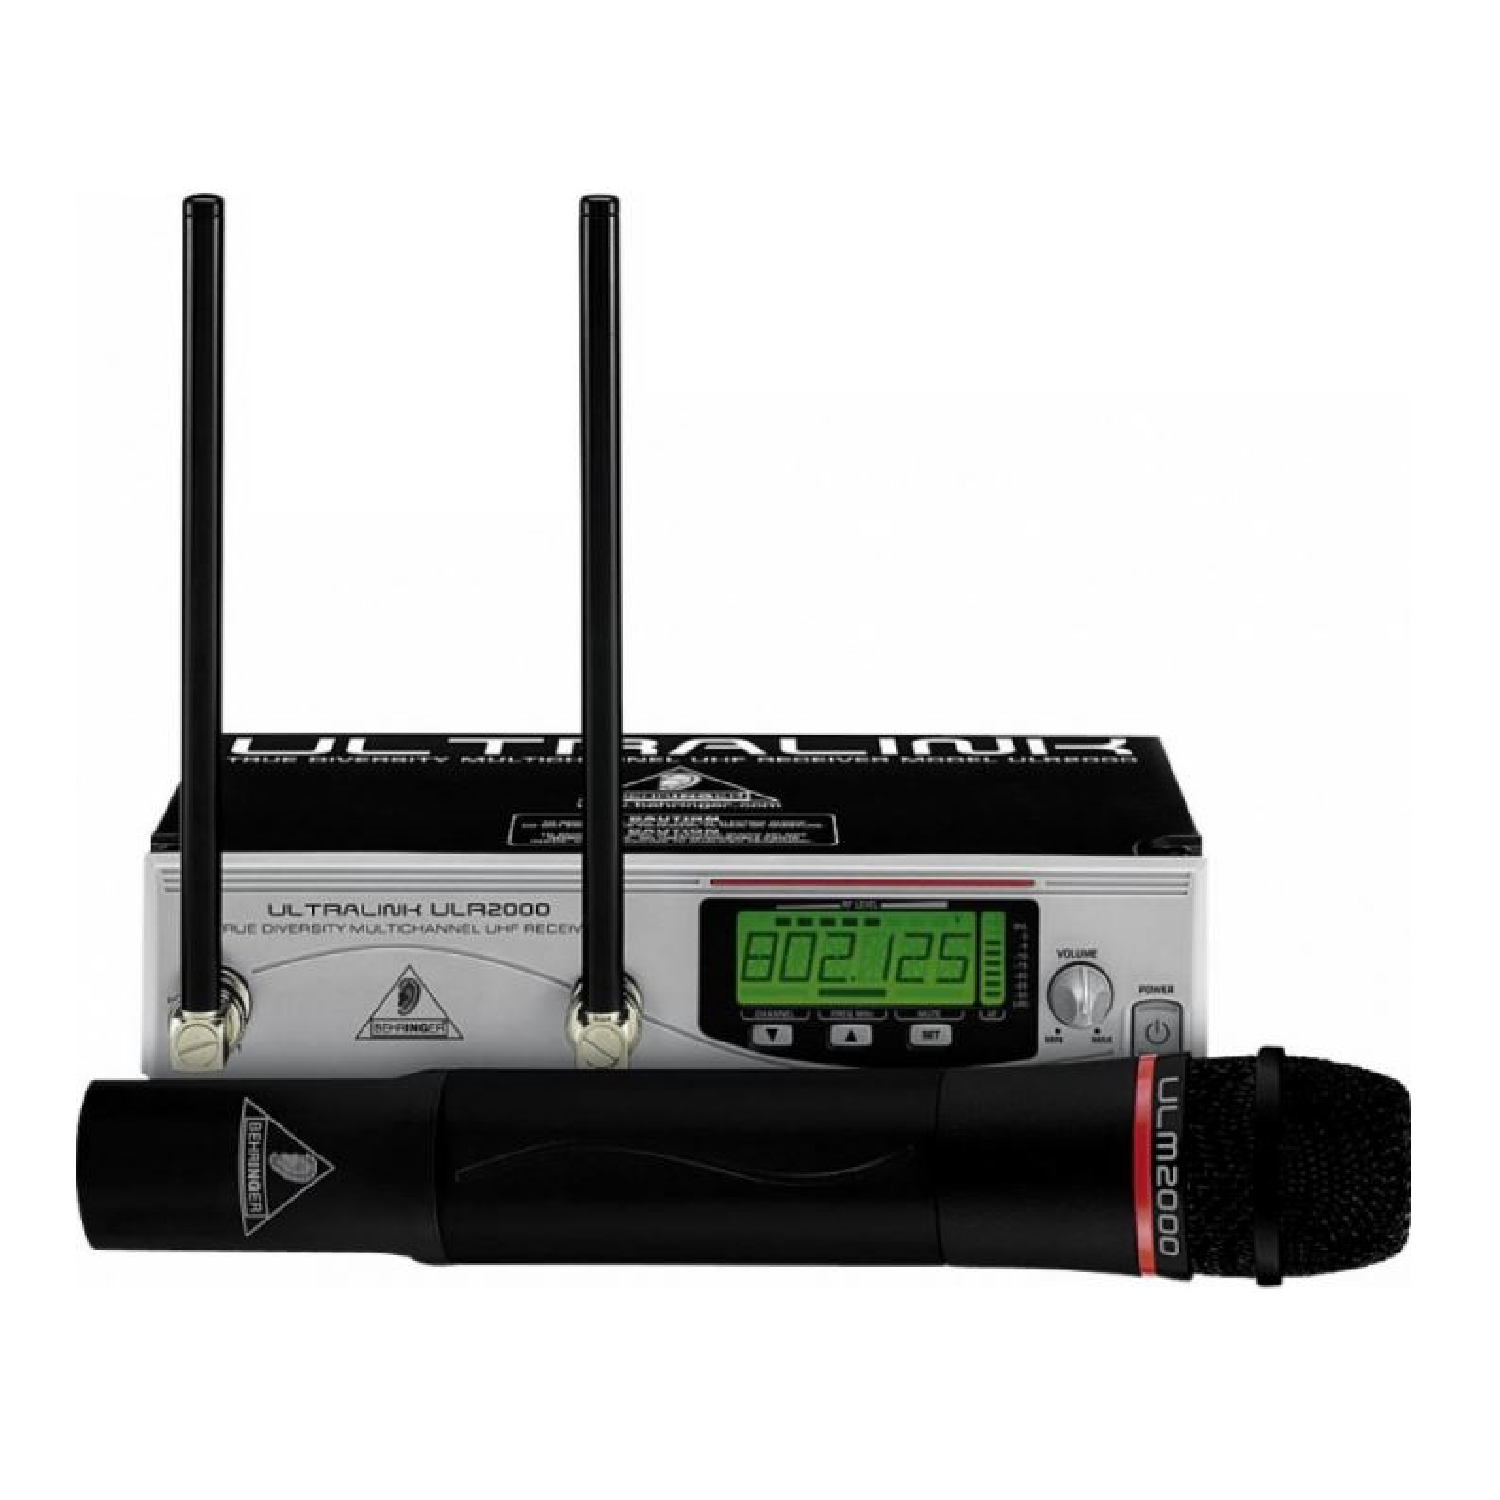 UHF True Diversity Wireless Microphone System with 320 Selectable Frequencies UL2000M behringer